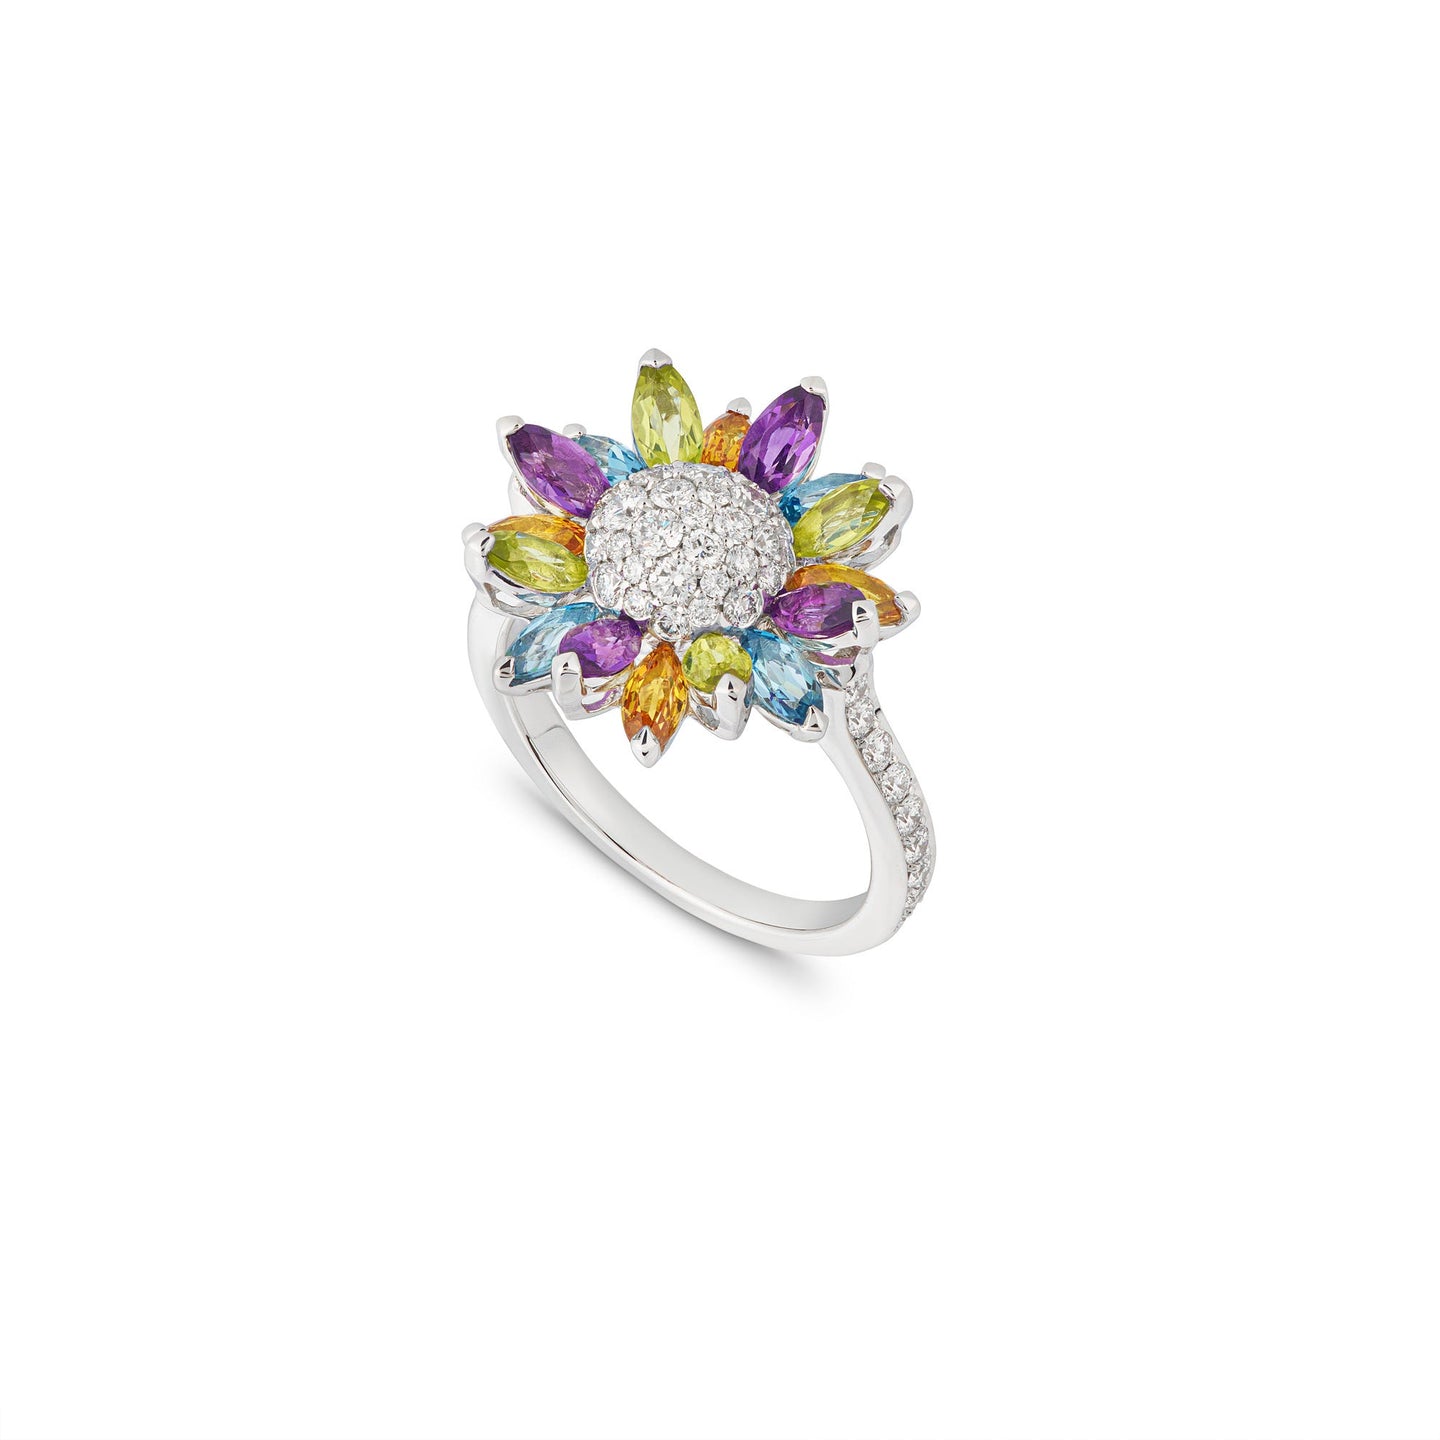 Daisy Small Ring in 18ct White Gold with Multicoloured Gemstones